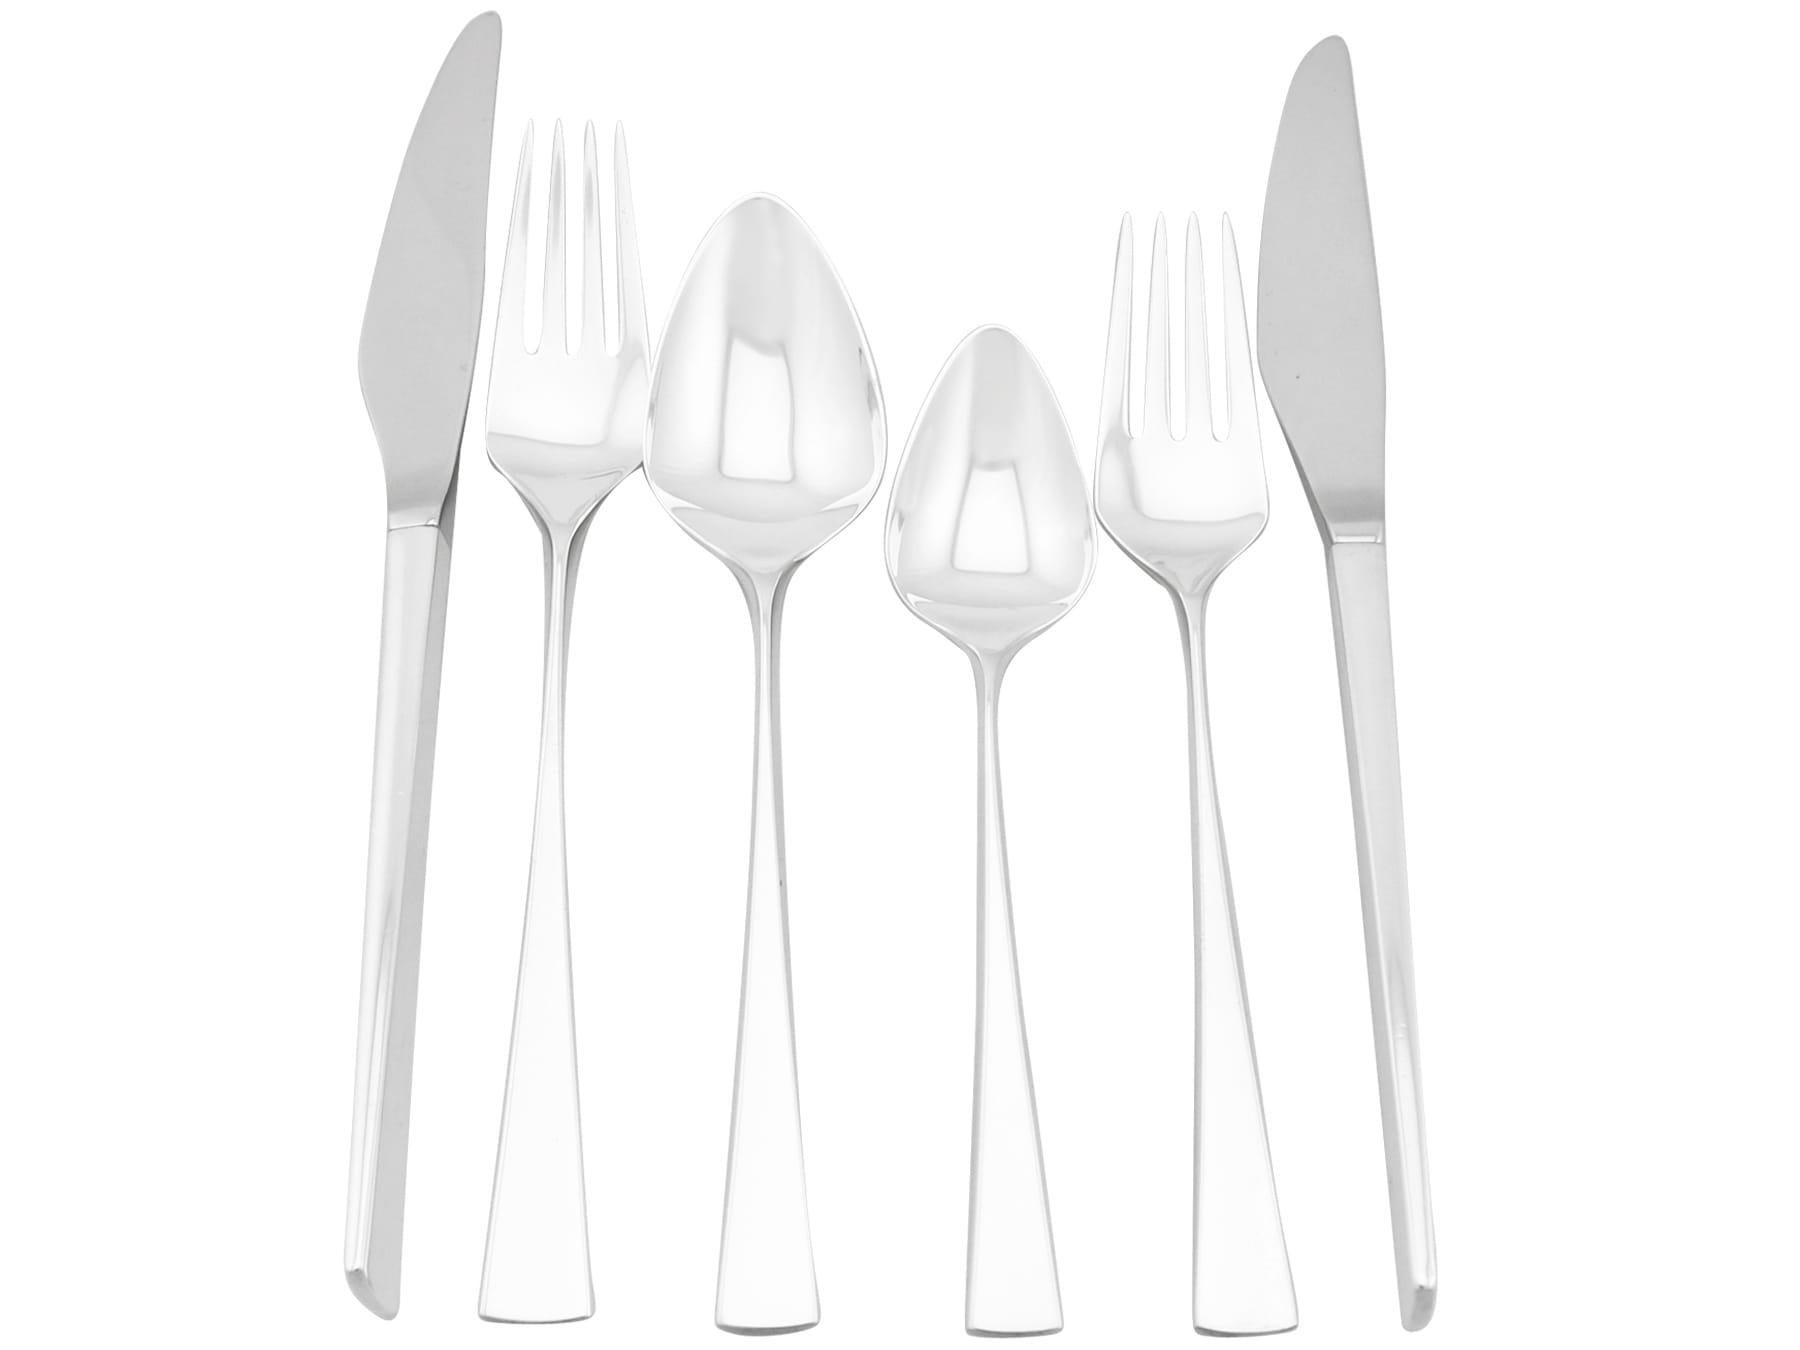 An exceptional, fine and impressive vintage American sterling silver straight flatware service for six persons, in the design style, an addition to our canteen of cutlery collection.

The pieces of this exceptional vintage American silver flatware